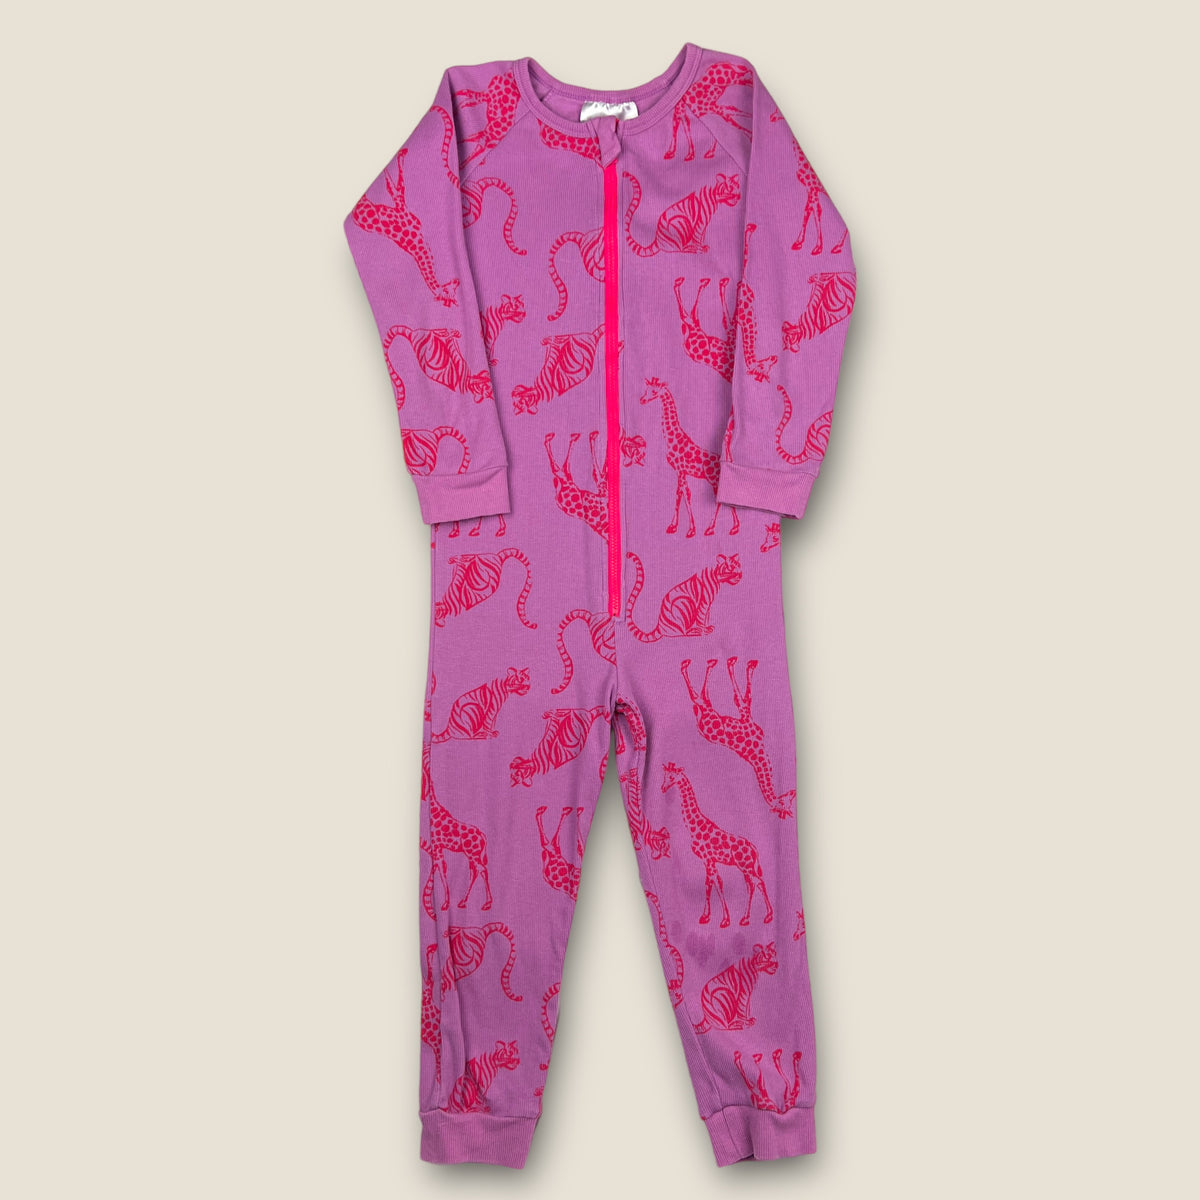 Bonds Ribbed Romper size 4 years